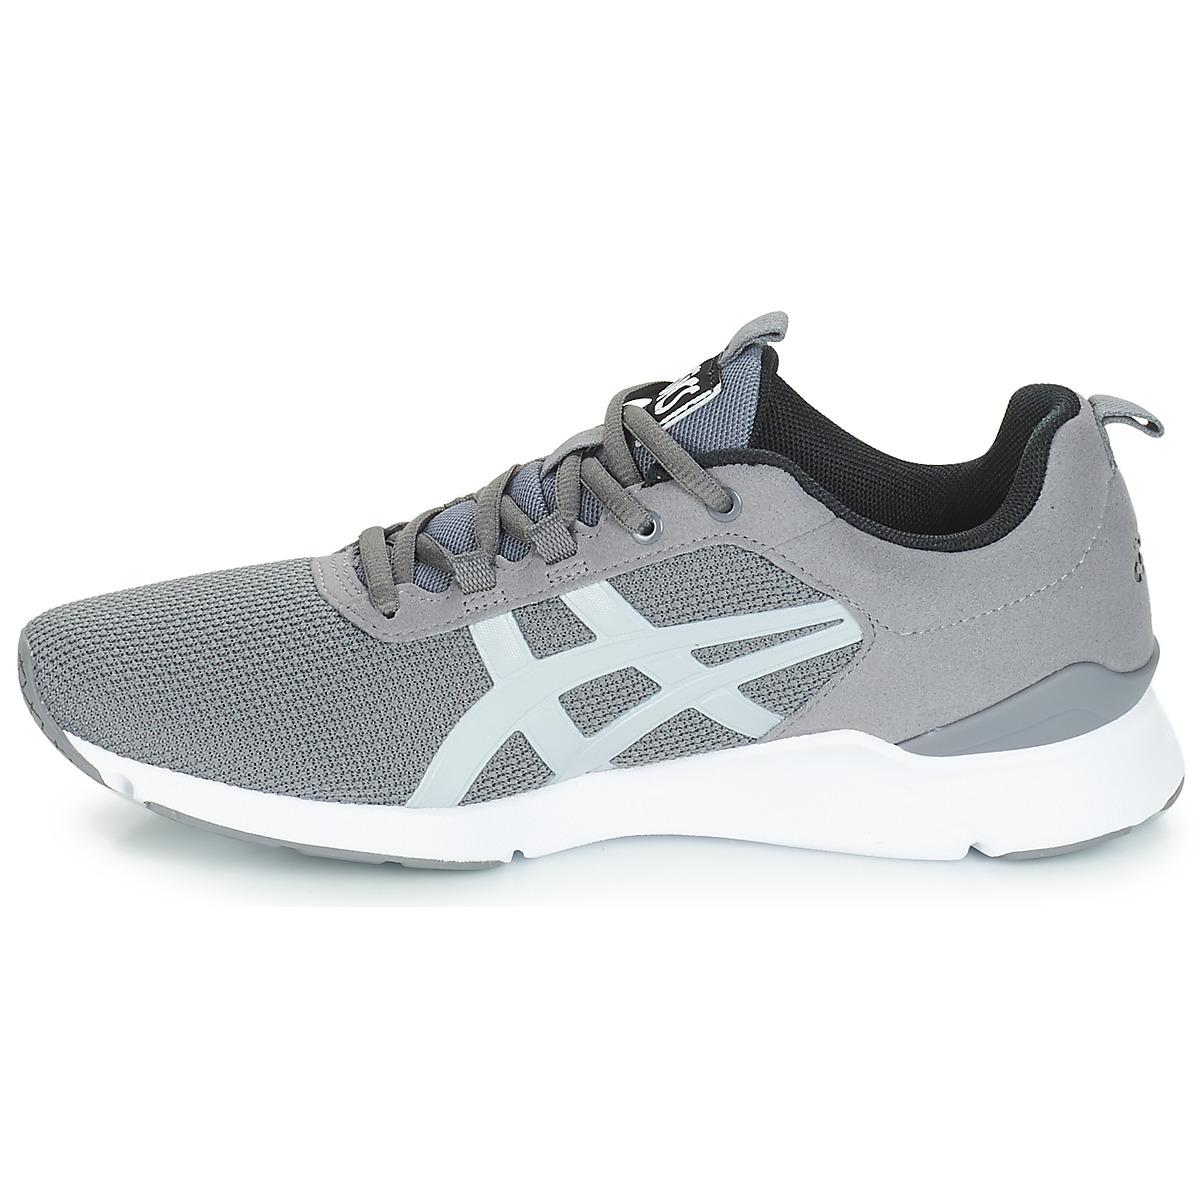 Asics Synthetic Lifestyle Gel-lyte Runner Trainers in Grey (Grey) - Save  77% - Lyst